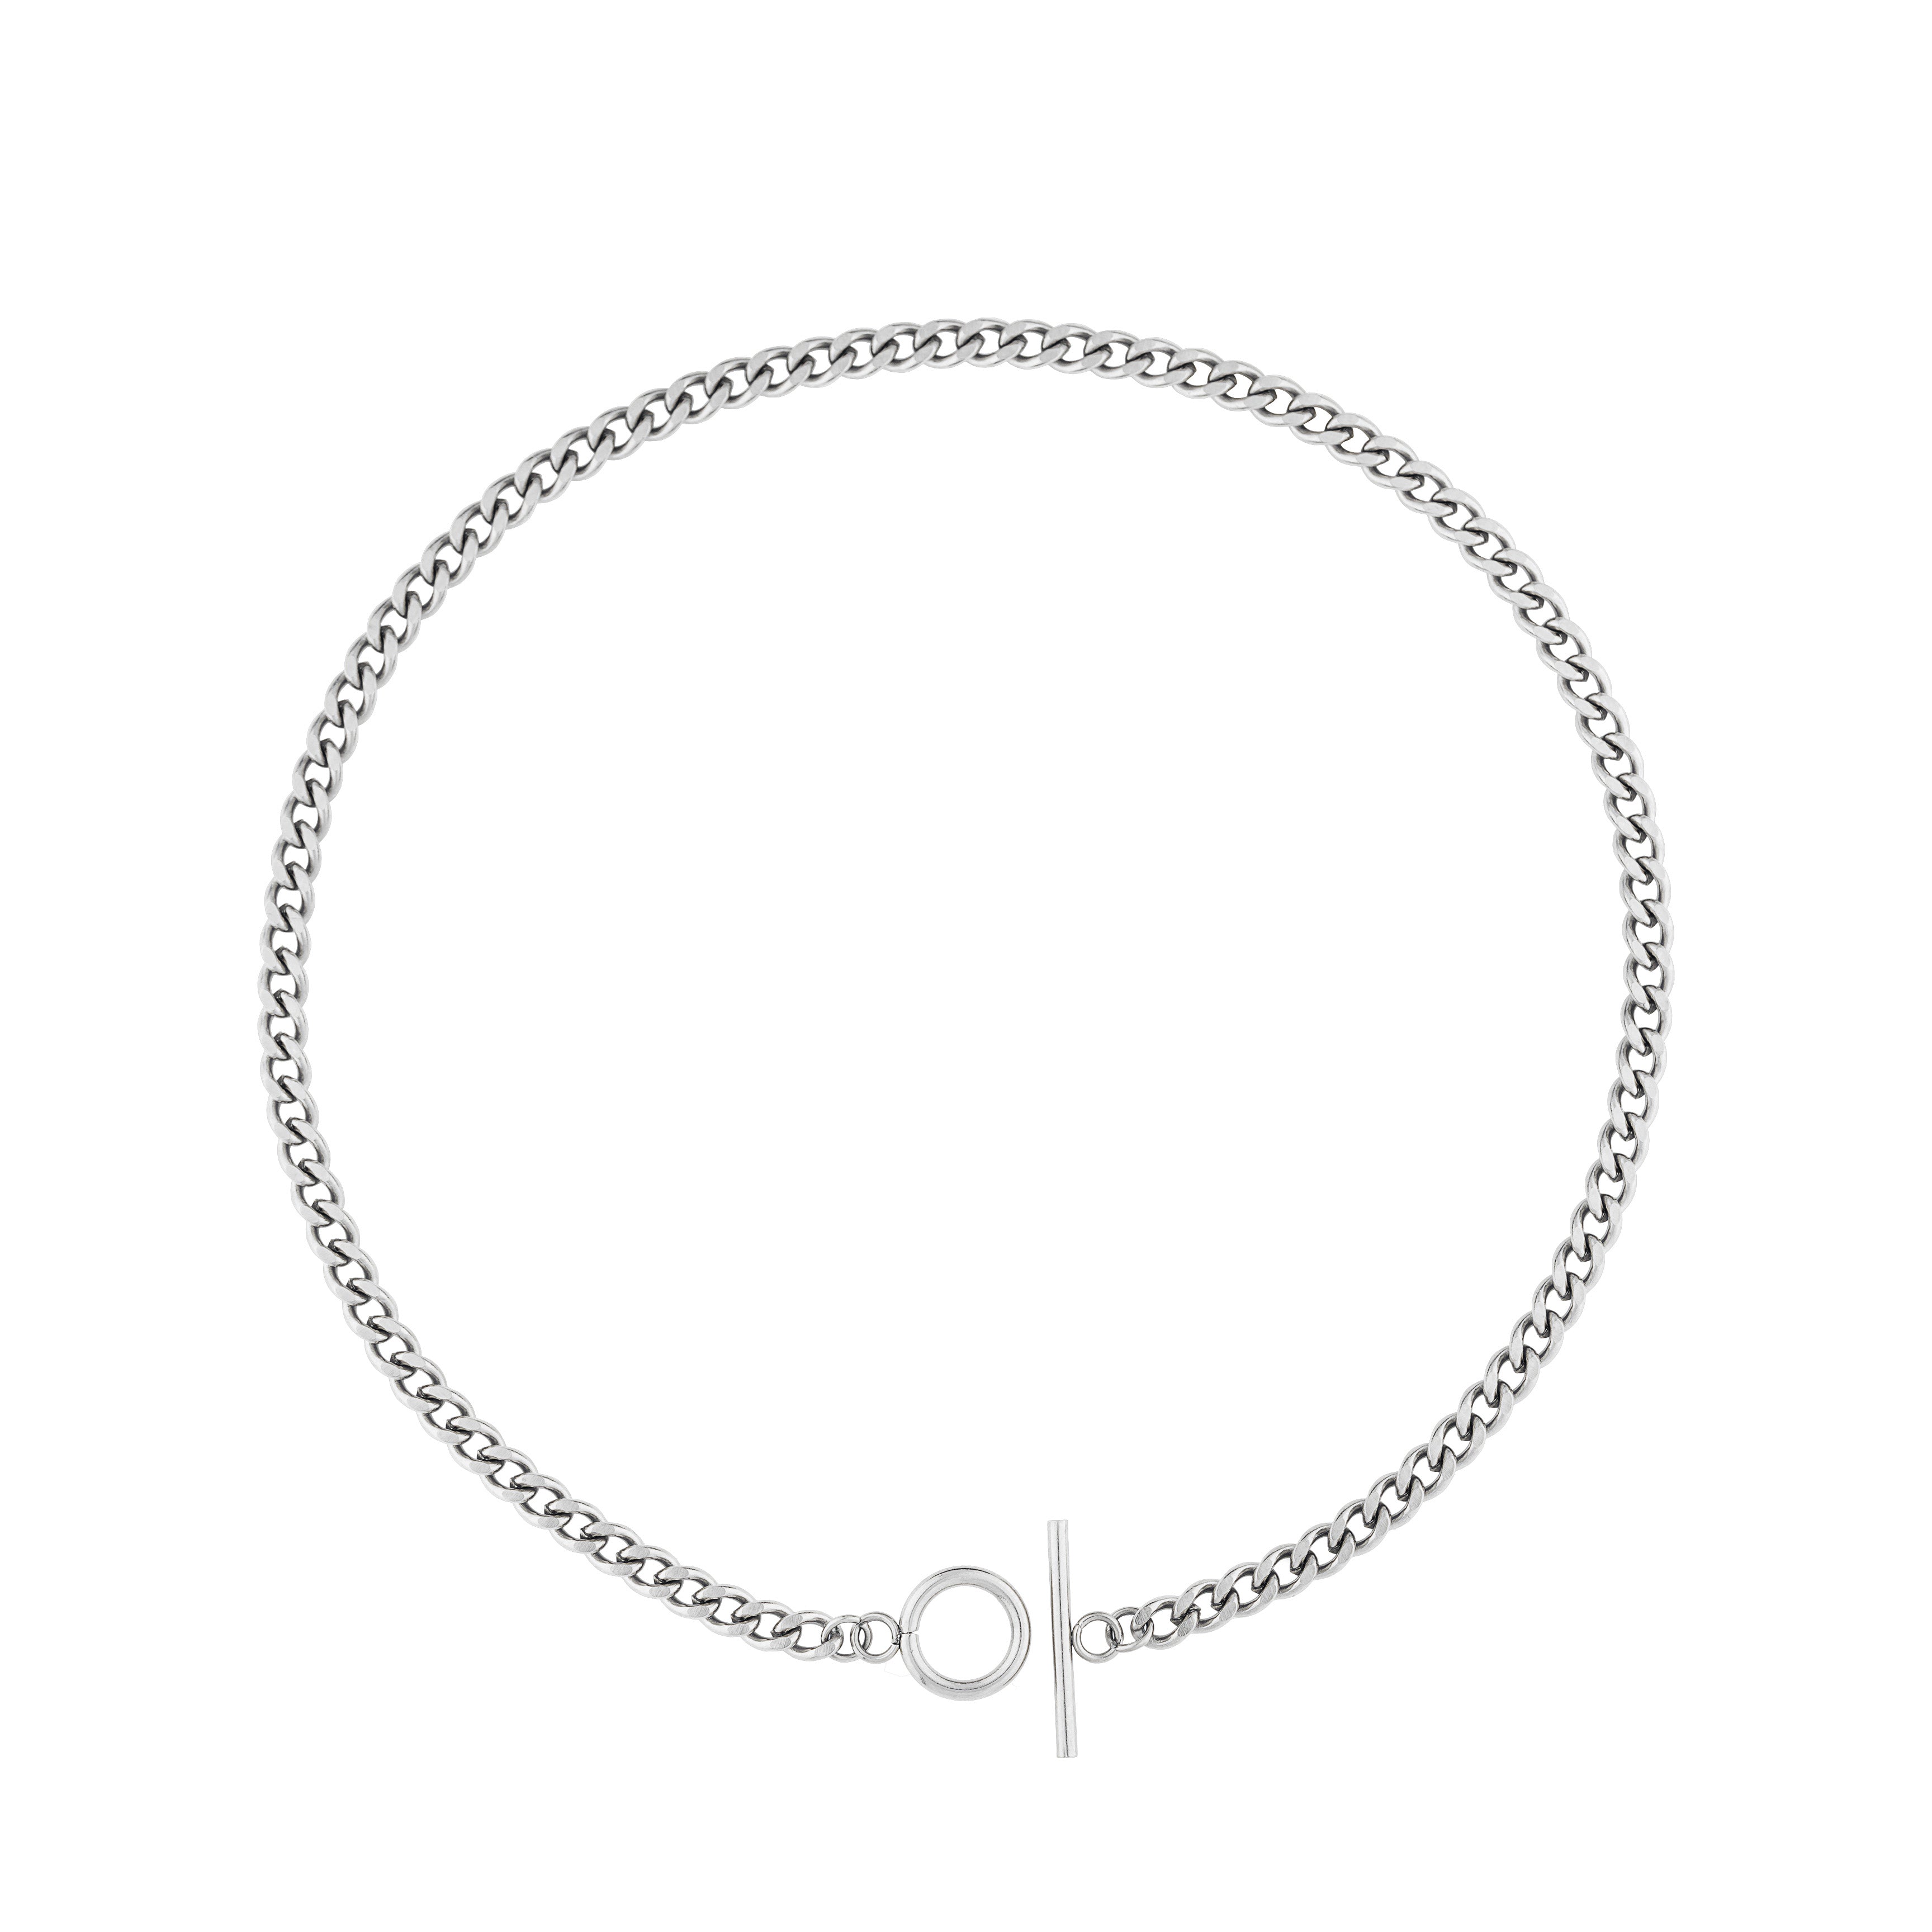 Jucar necklace from Five Jwlry, designed in Montreal, Canada. Features a Cuban chain link in silver-colored, ultra-resistant 316L stainless steel with a distinctive circular toggle clasp closure.